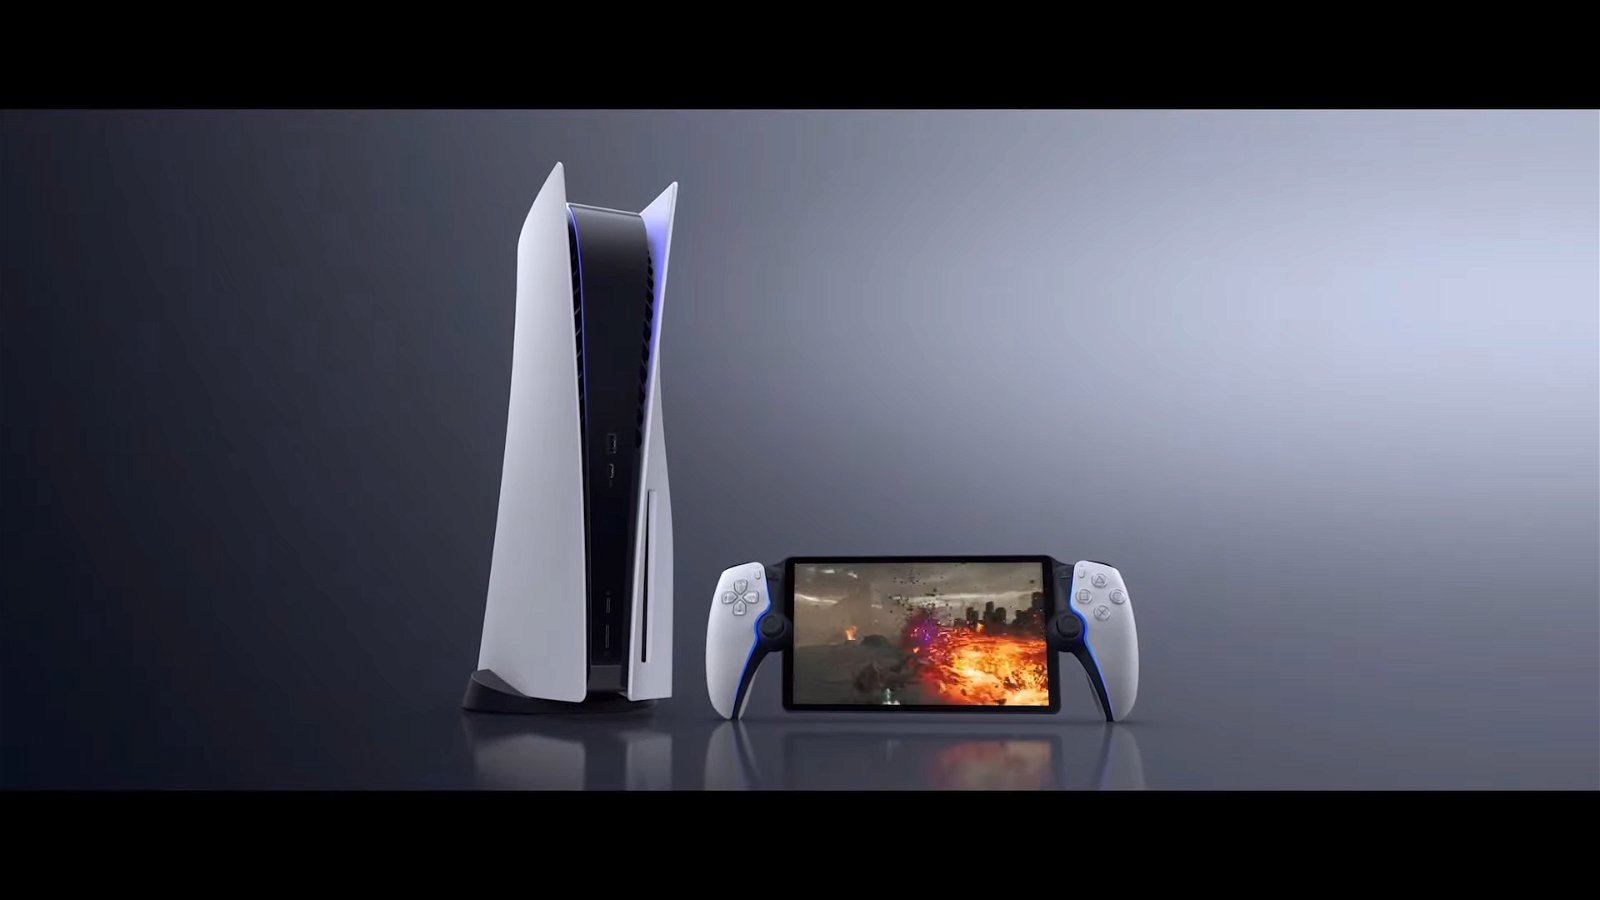 PlayStation’s Remote-Play Handheld Device “Project Q” revealed